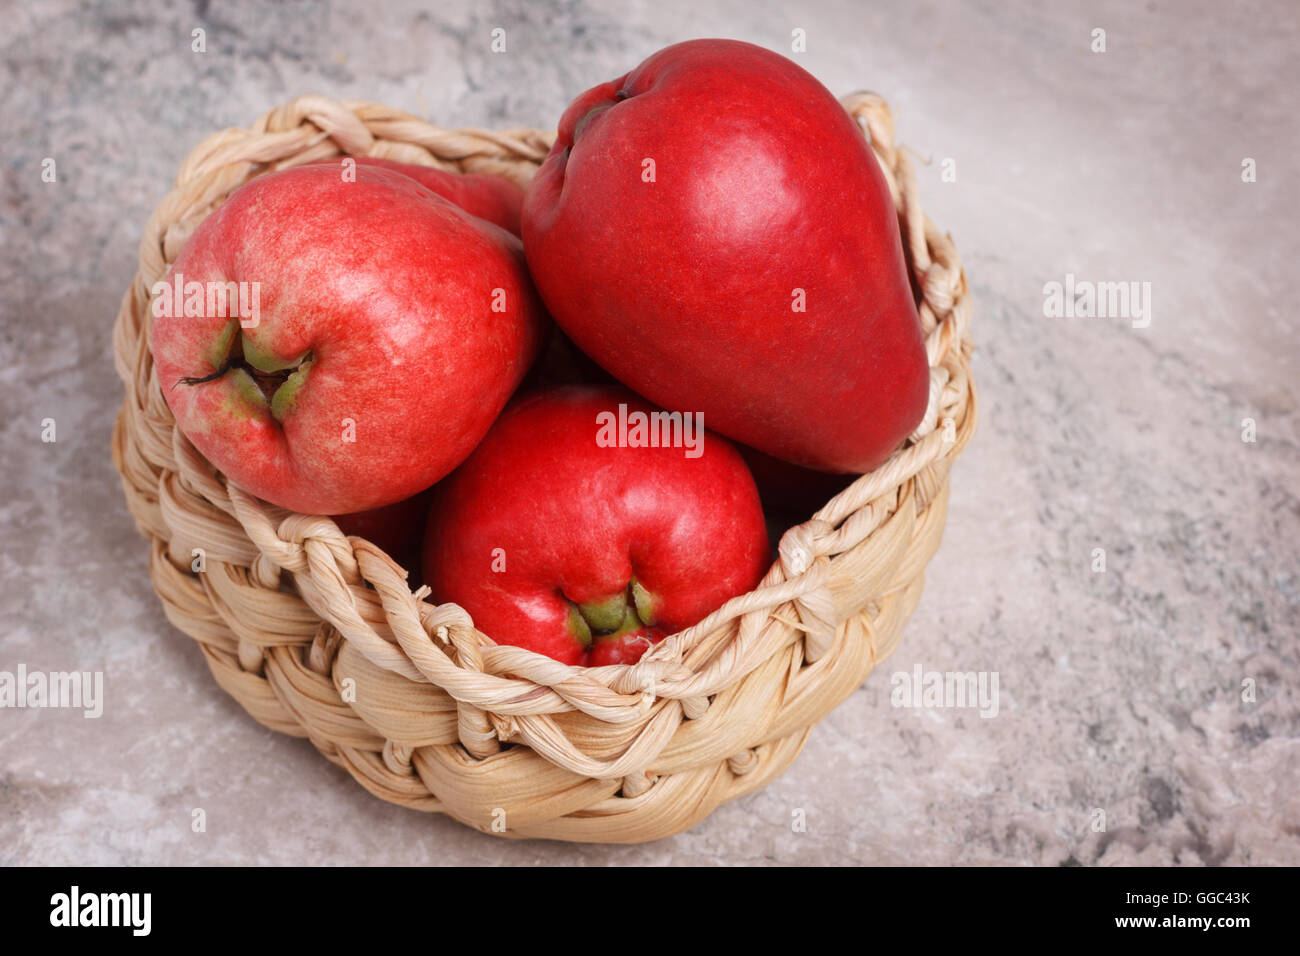 Tropical fruit Acmella oleracea (toothache plant, paracress, electric daisy, jambu) in wicker basket on marble table Stock Photo